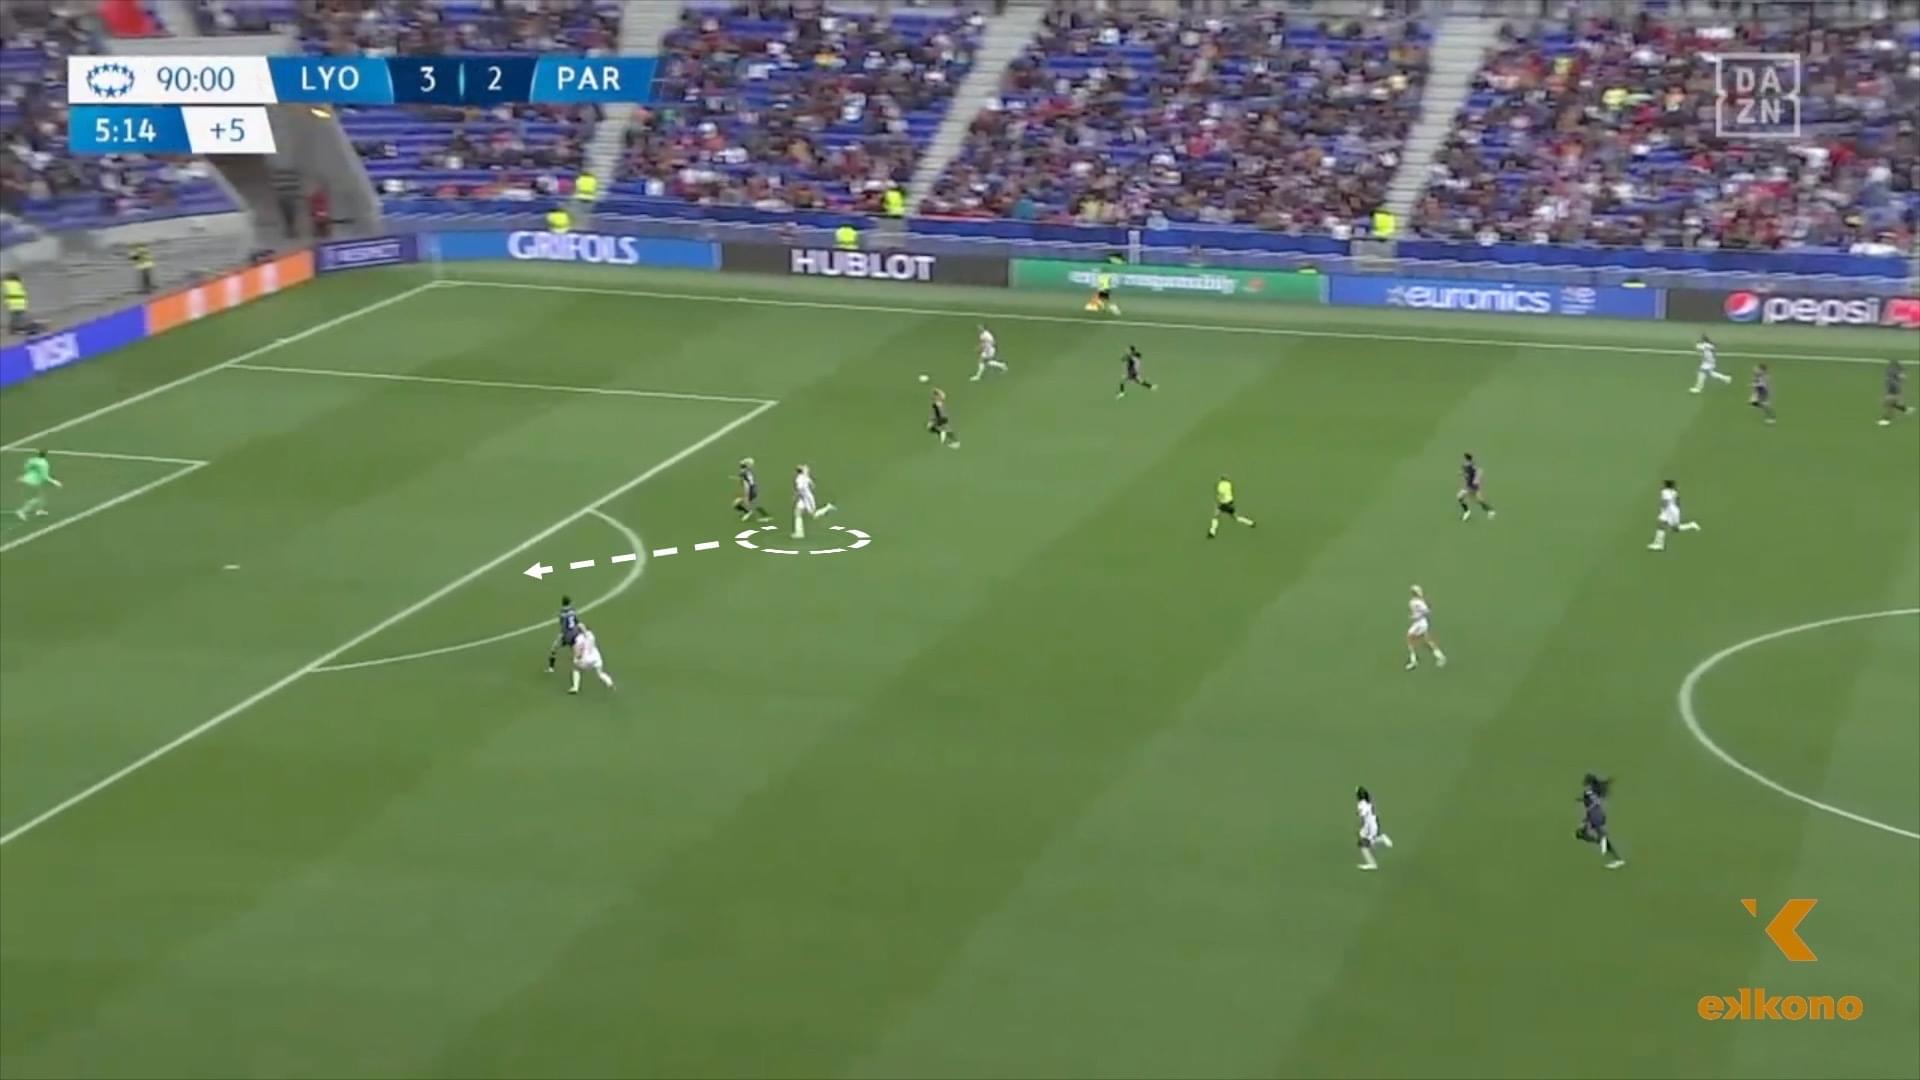 When attacking the box, Hegerberg feints before making the final run. This helps her create space to finish the action